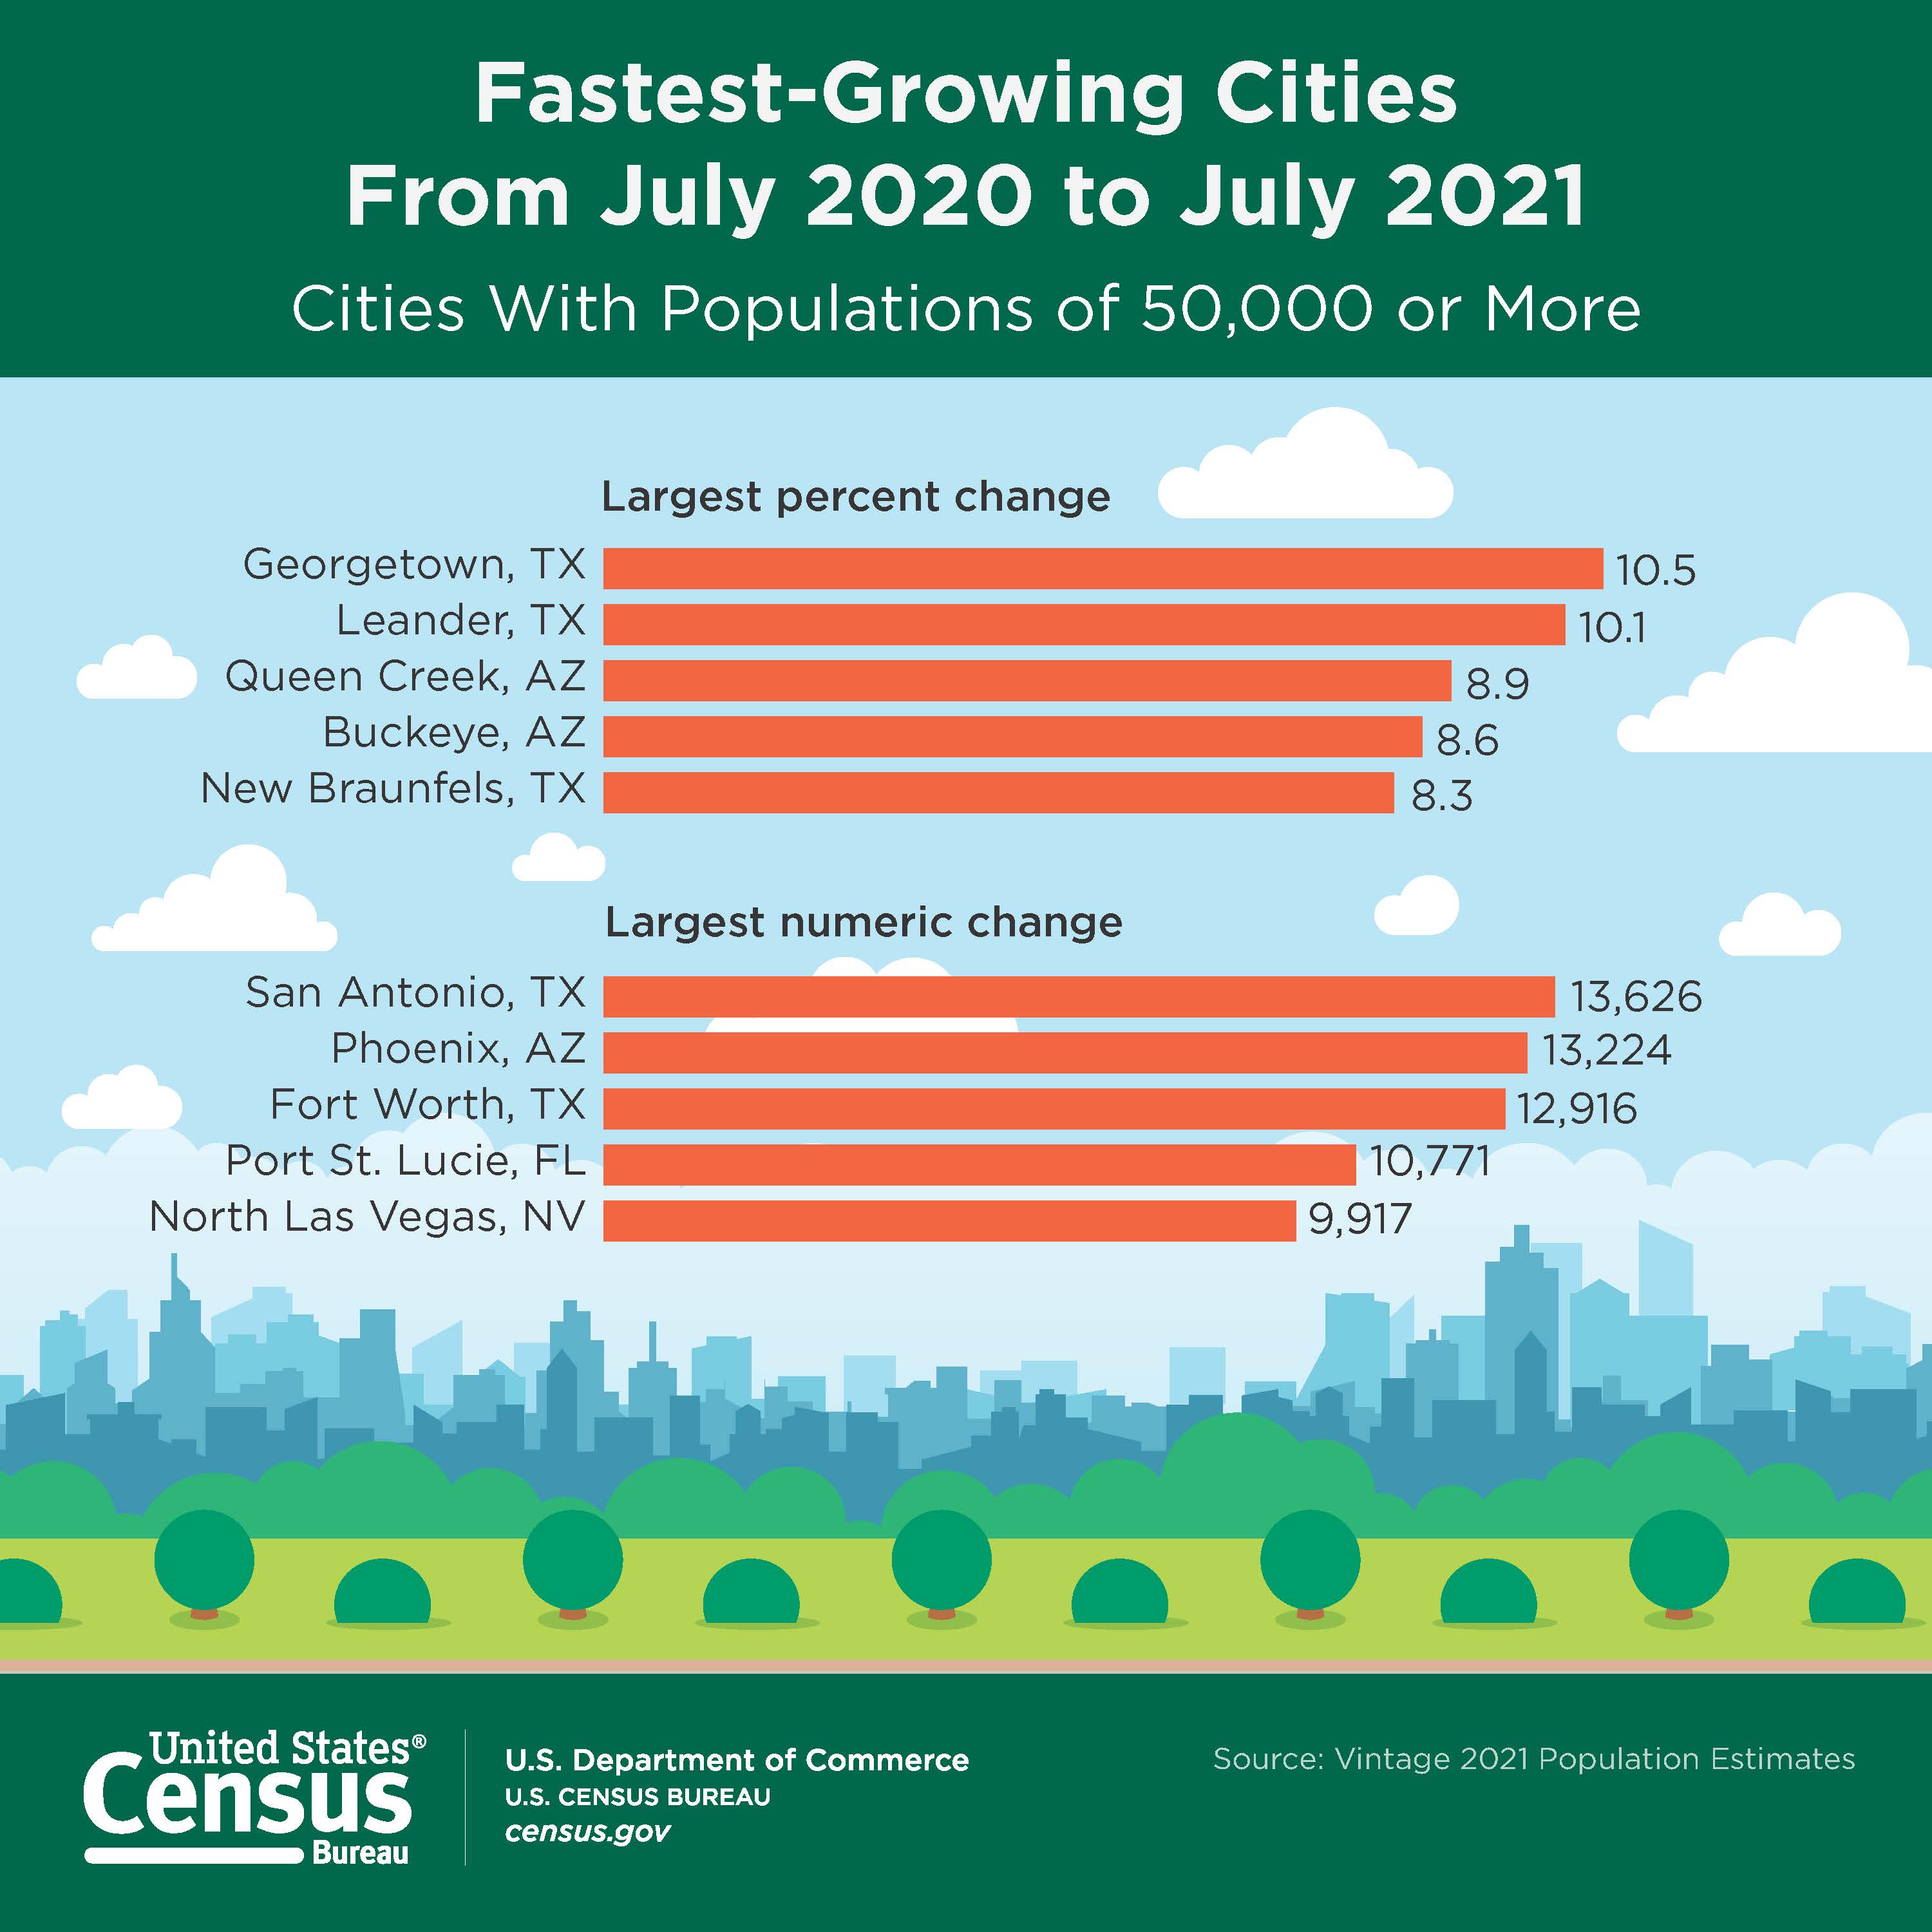 What are the top 5 growing cities in America?